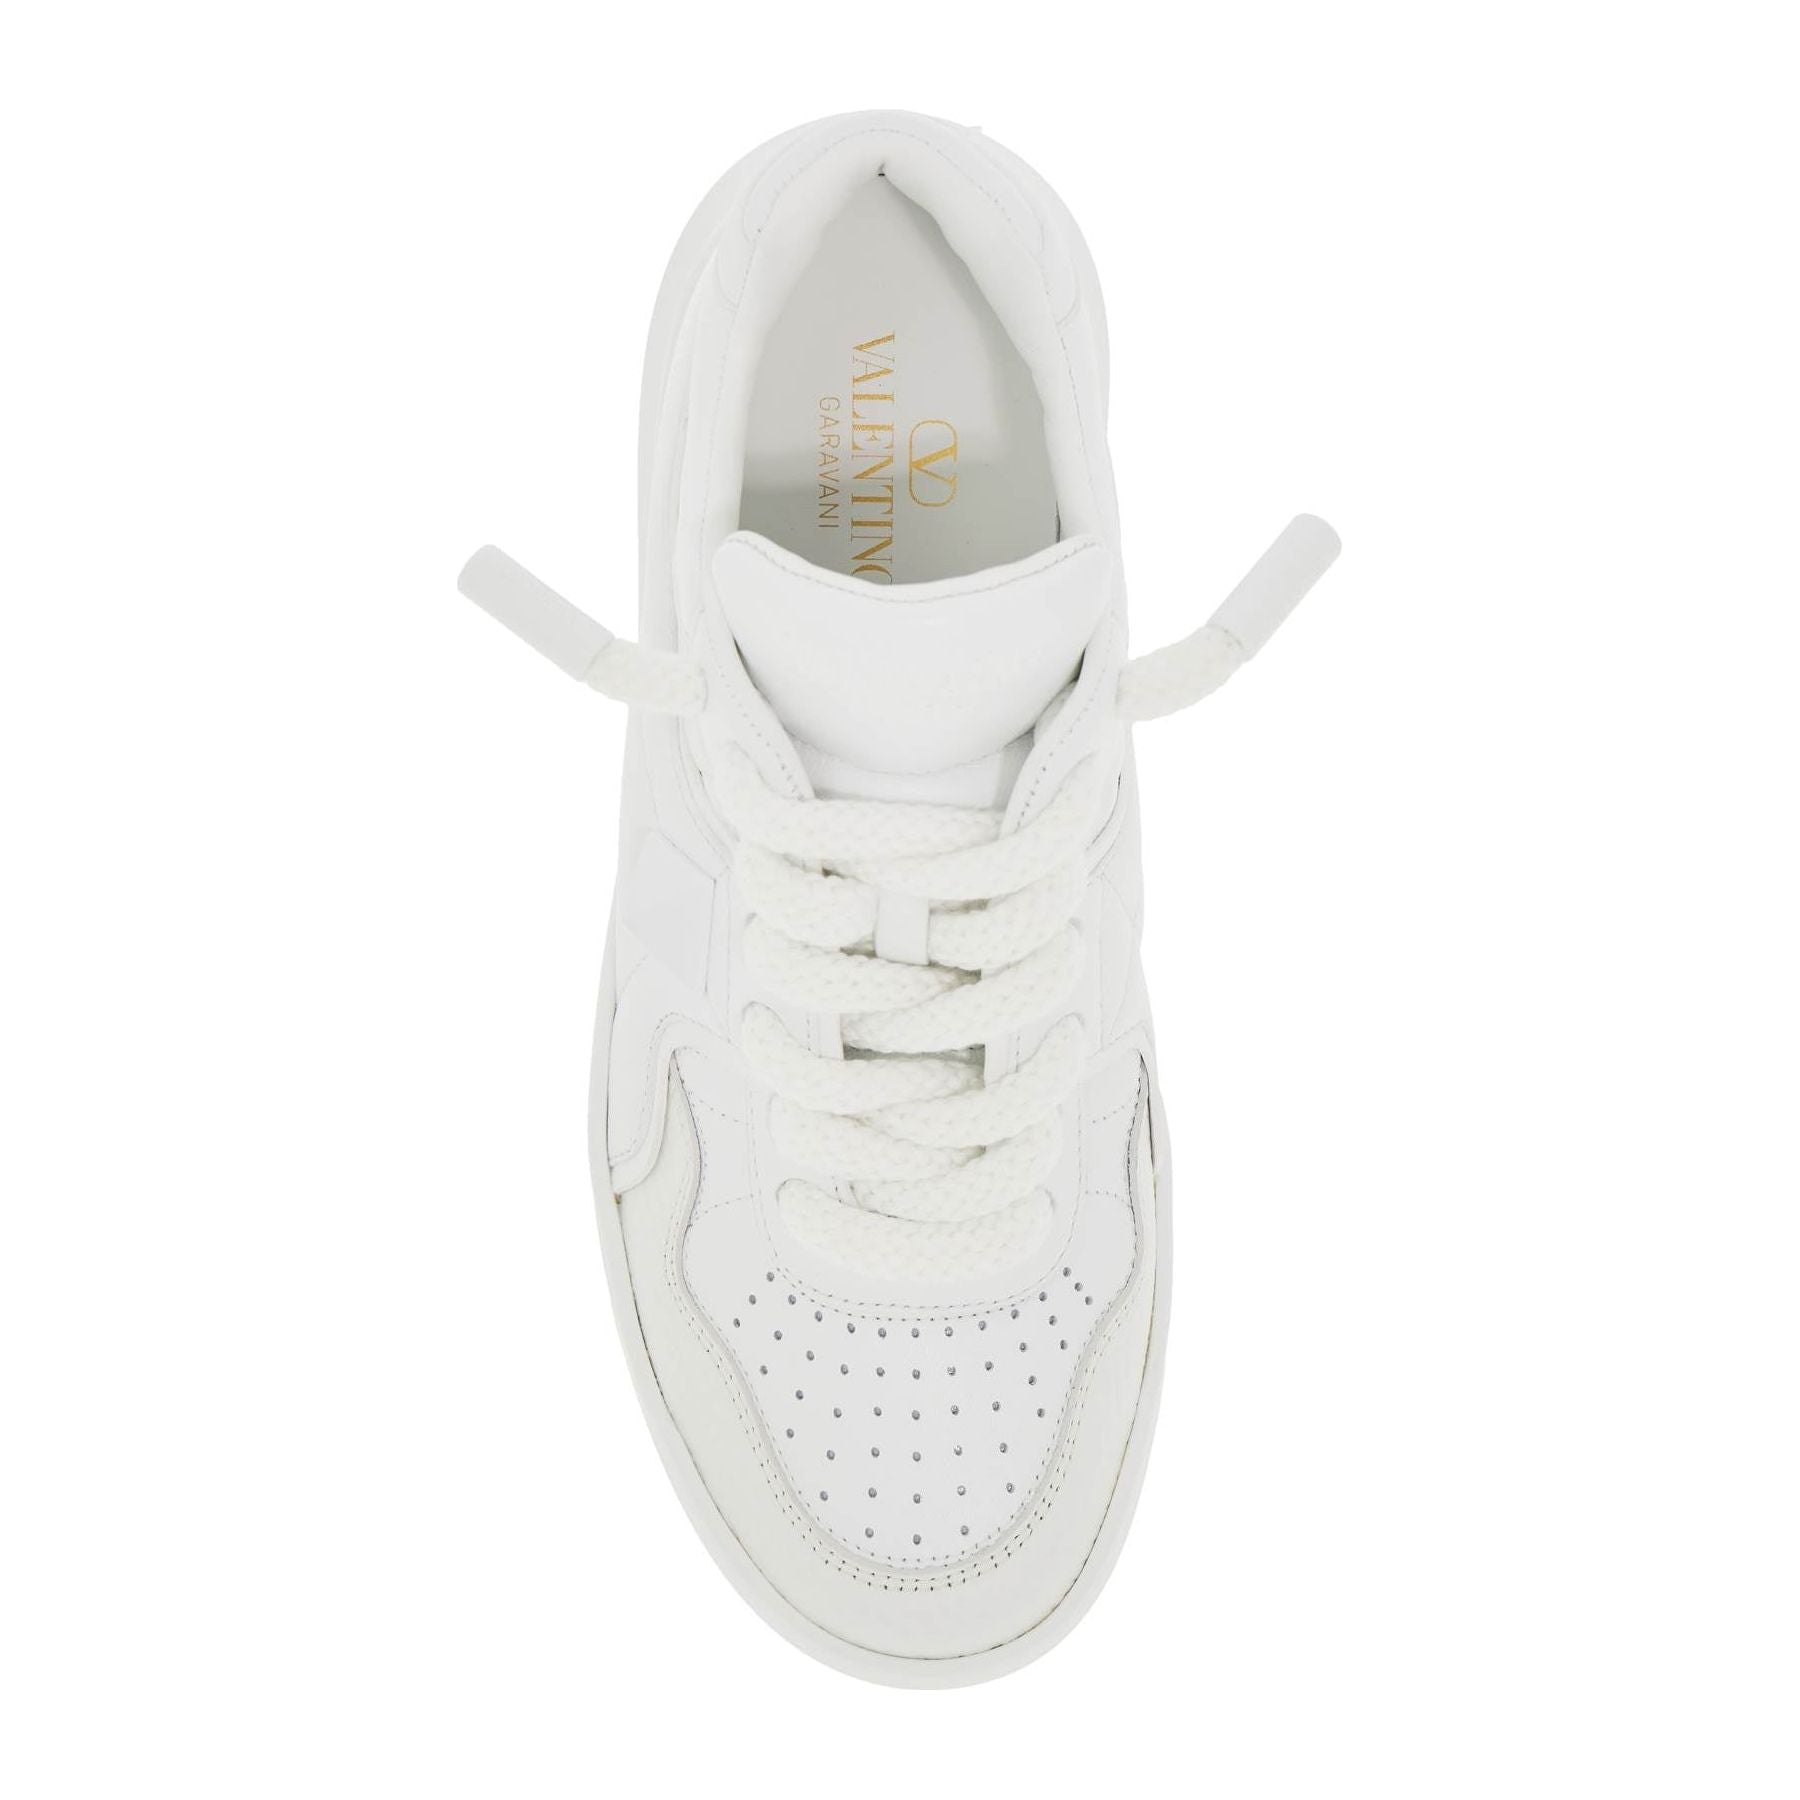 One Stud XL Nappa Leather Sneakers